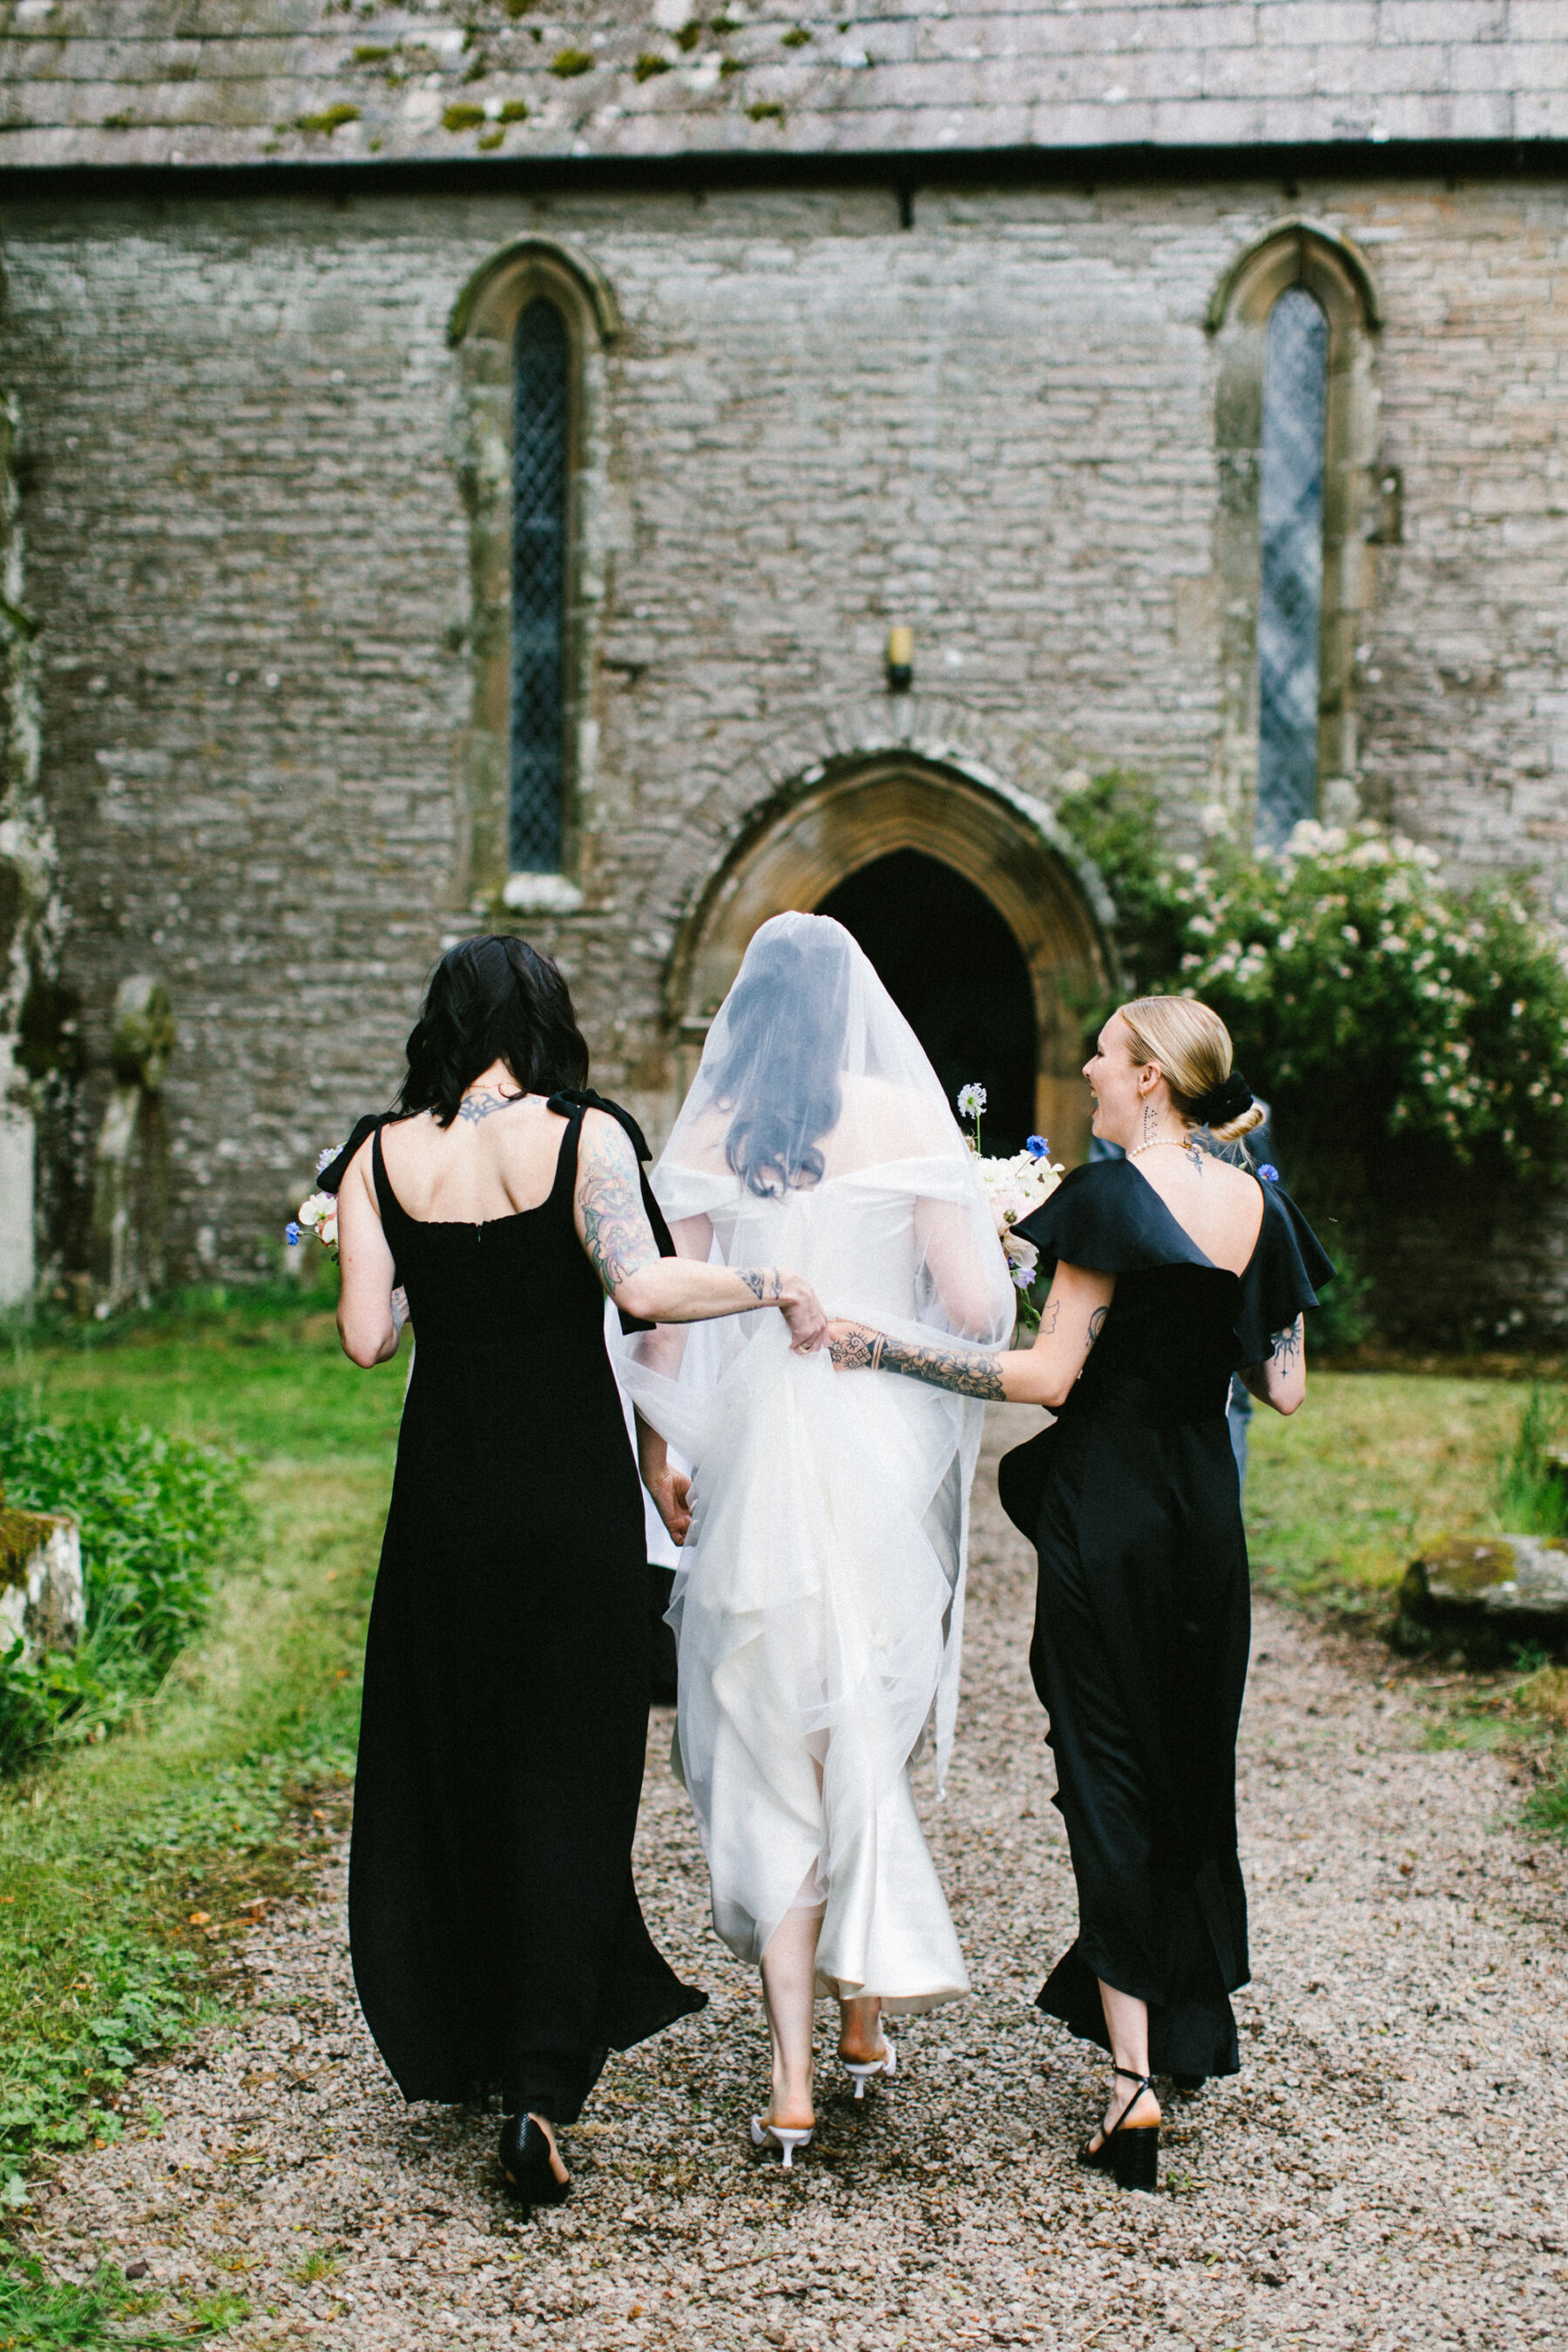 Bridea and her bridesmaids wearing black dresses walking into the church. The bridemaids hold hands behind the bride's back.